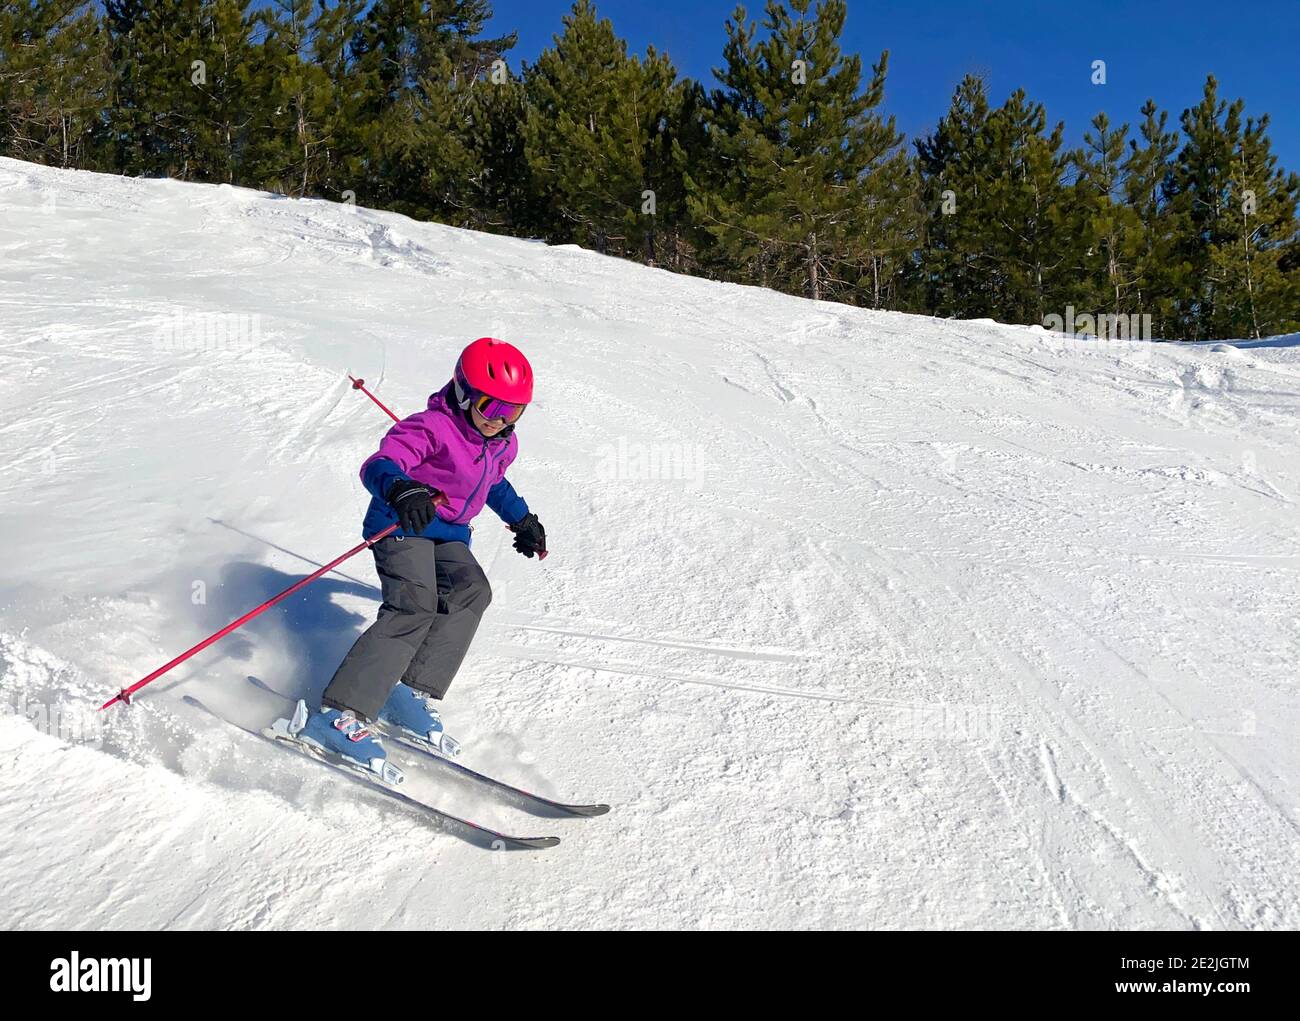 Young girl downhill skiing on an open slope at a ski resort in Quebec, Canada Stock Photo